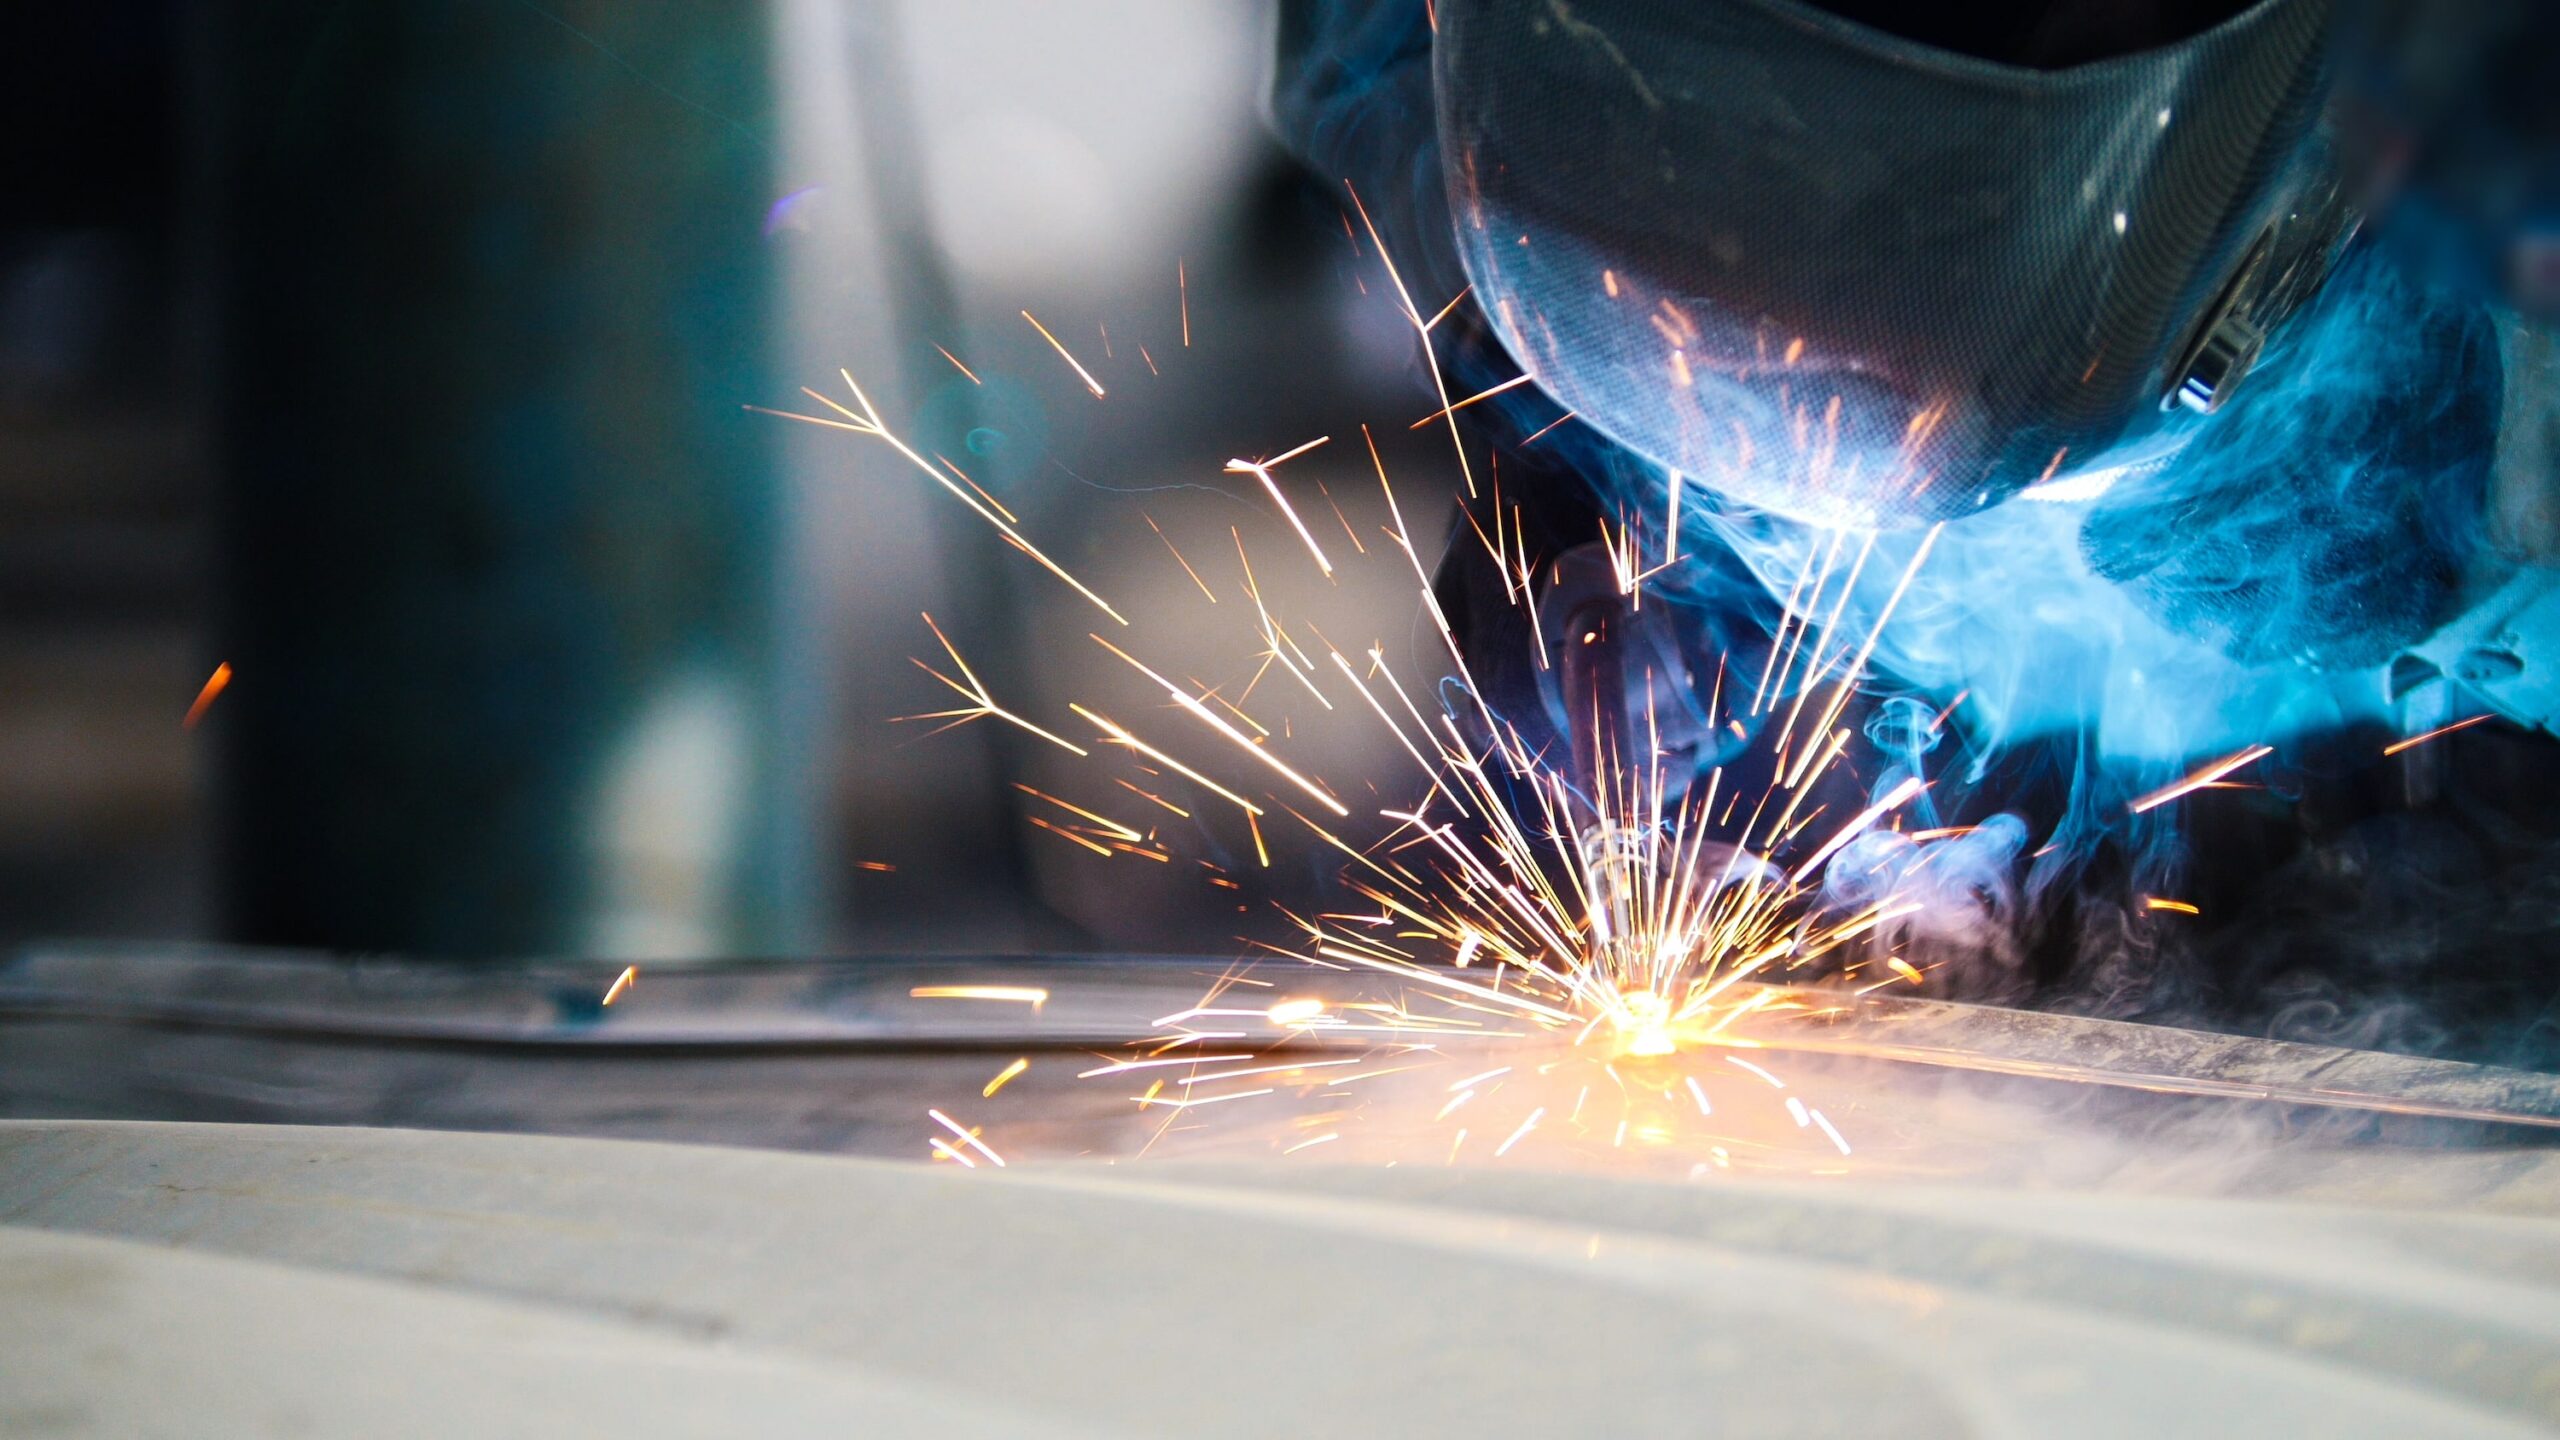 Employee welding steel while wearing safety gear, sparks flying